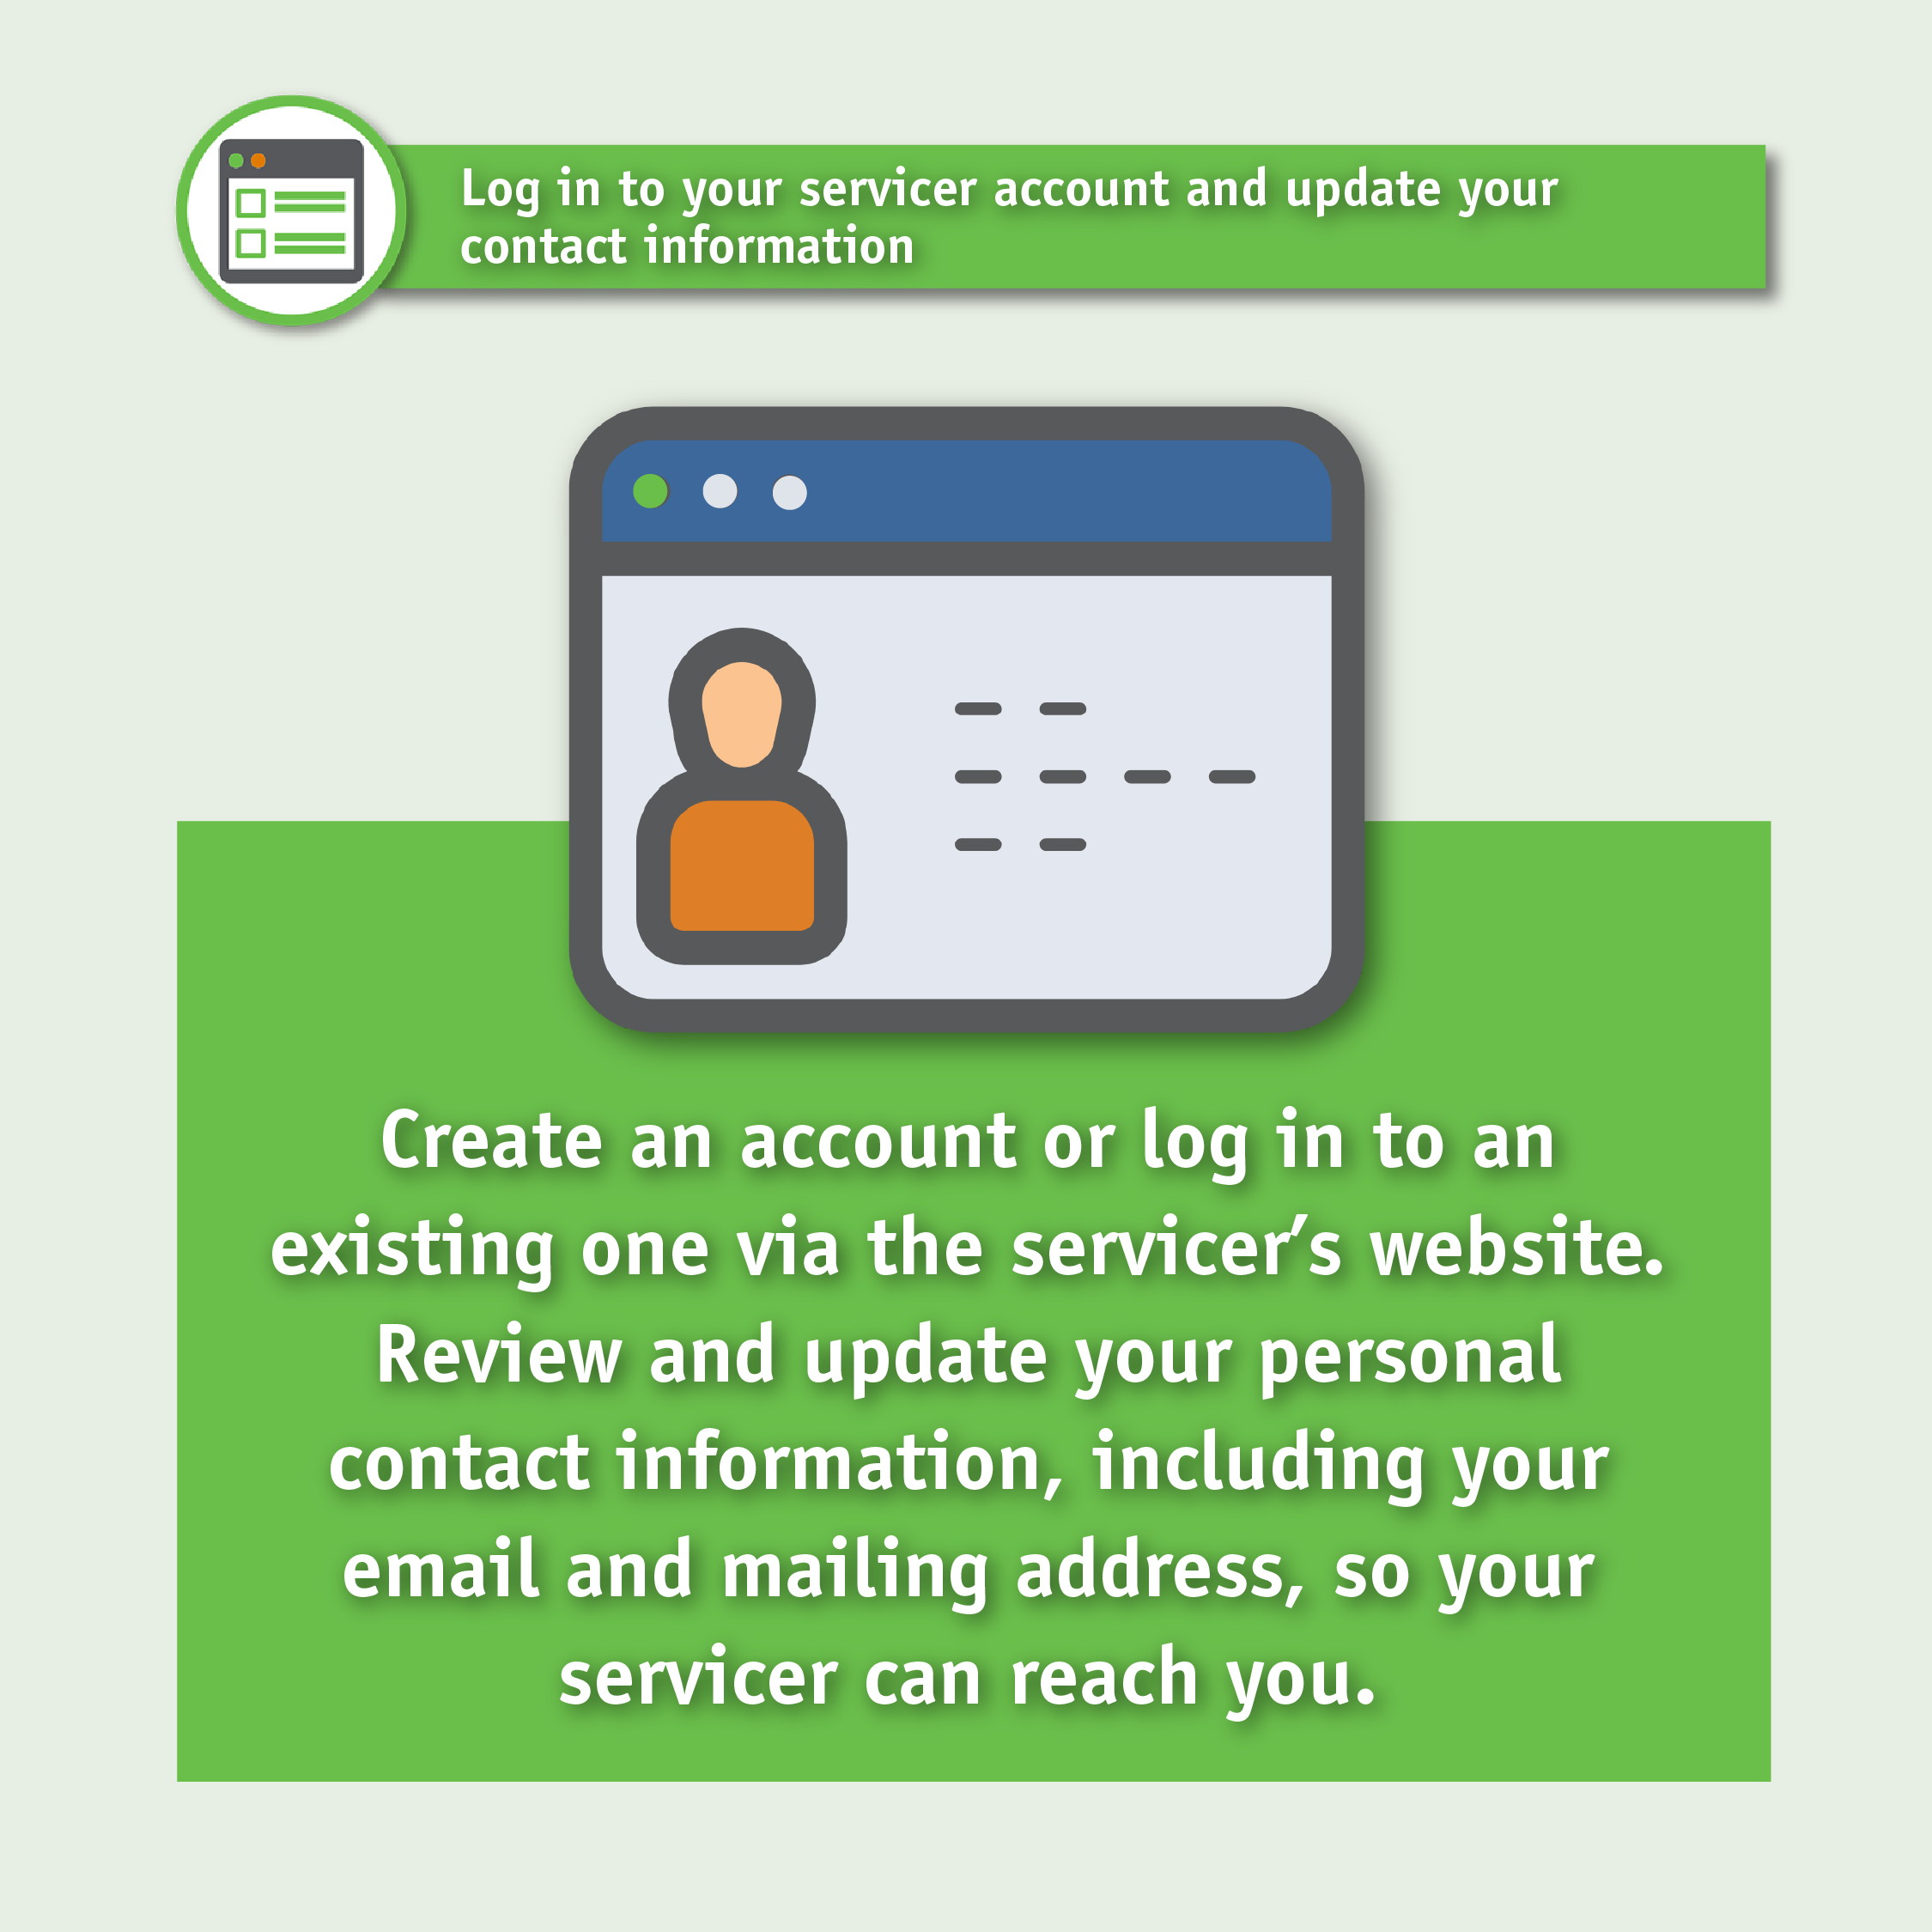 Log in to your servicer account and update your contact information. Create an account or log in to an existing one via the servicer's website. Review and update your personal contact information, including your email and mailing address, so your servicer can reach you.